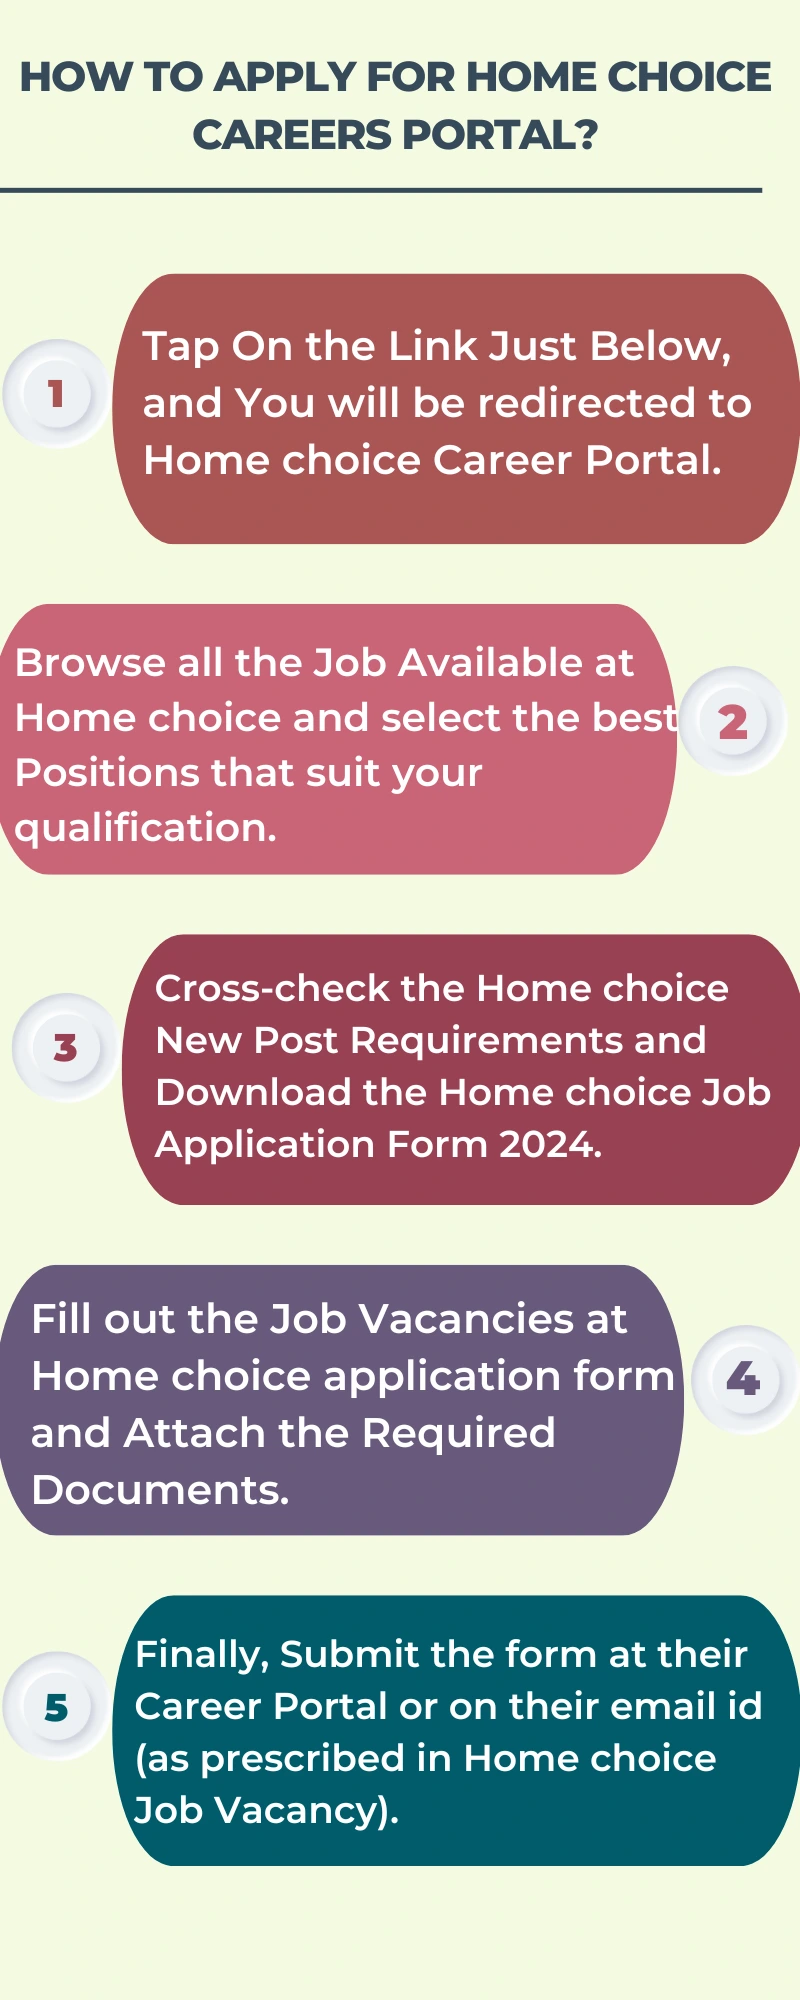 How To Apply for Home choice Careers Portal?